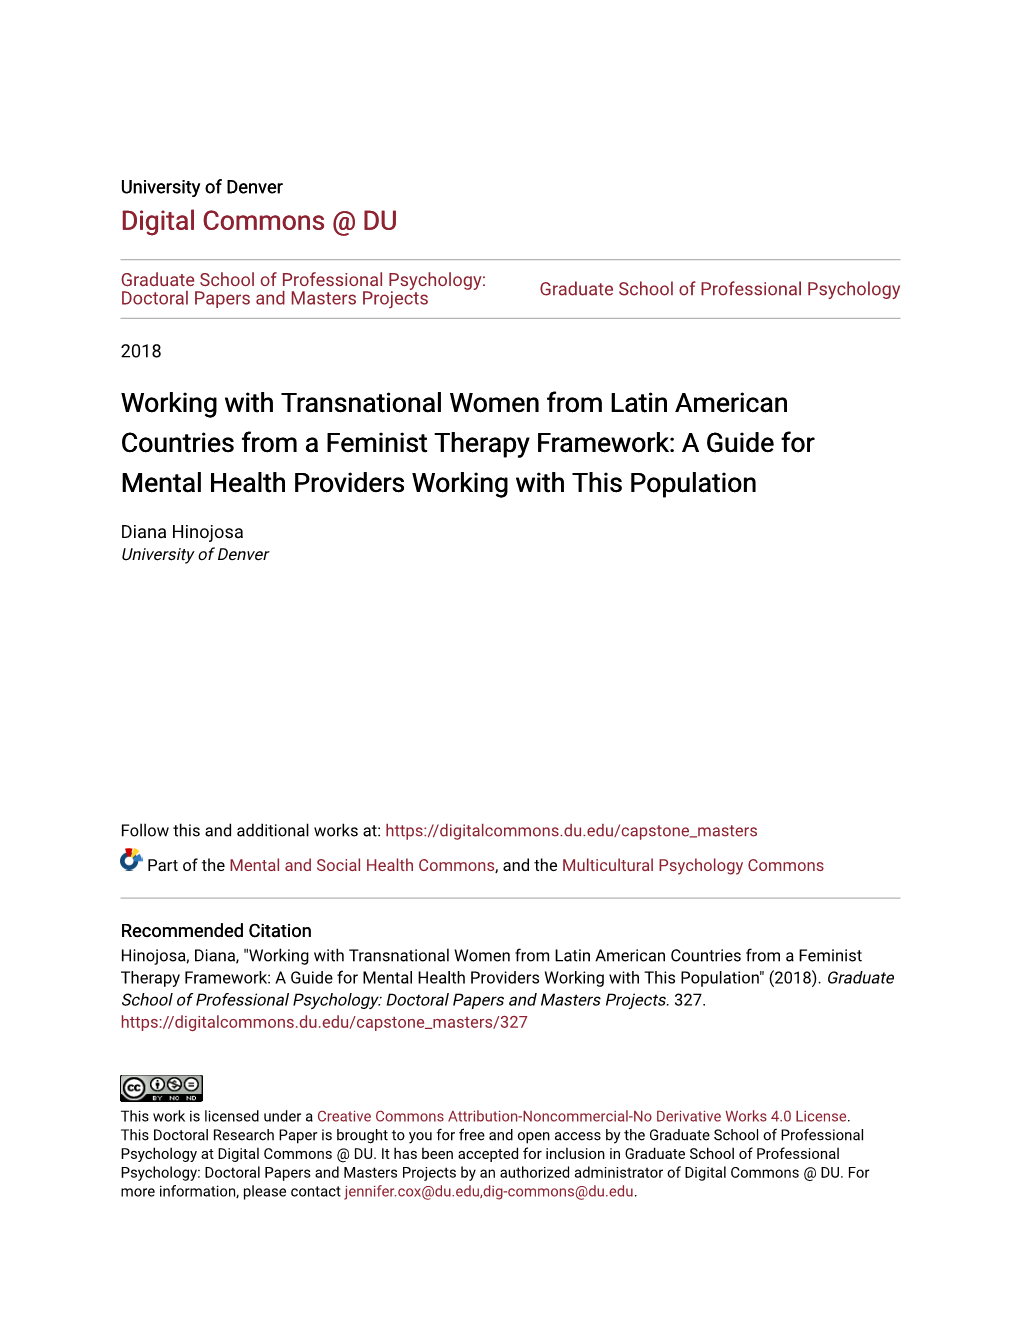 Working with Transnational Women from Latin American Countries from a Feminist Therapy Framework: a Guide for Mental Health Providers Working with This Population